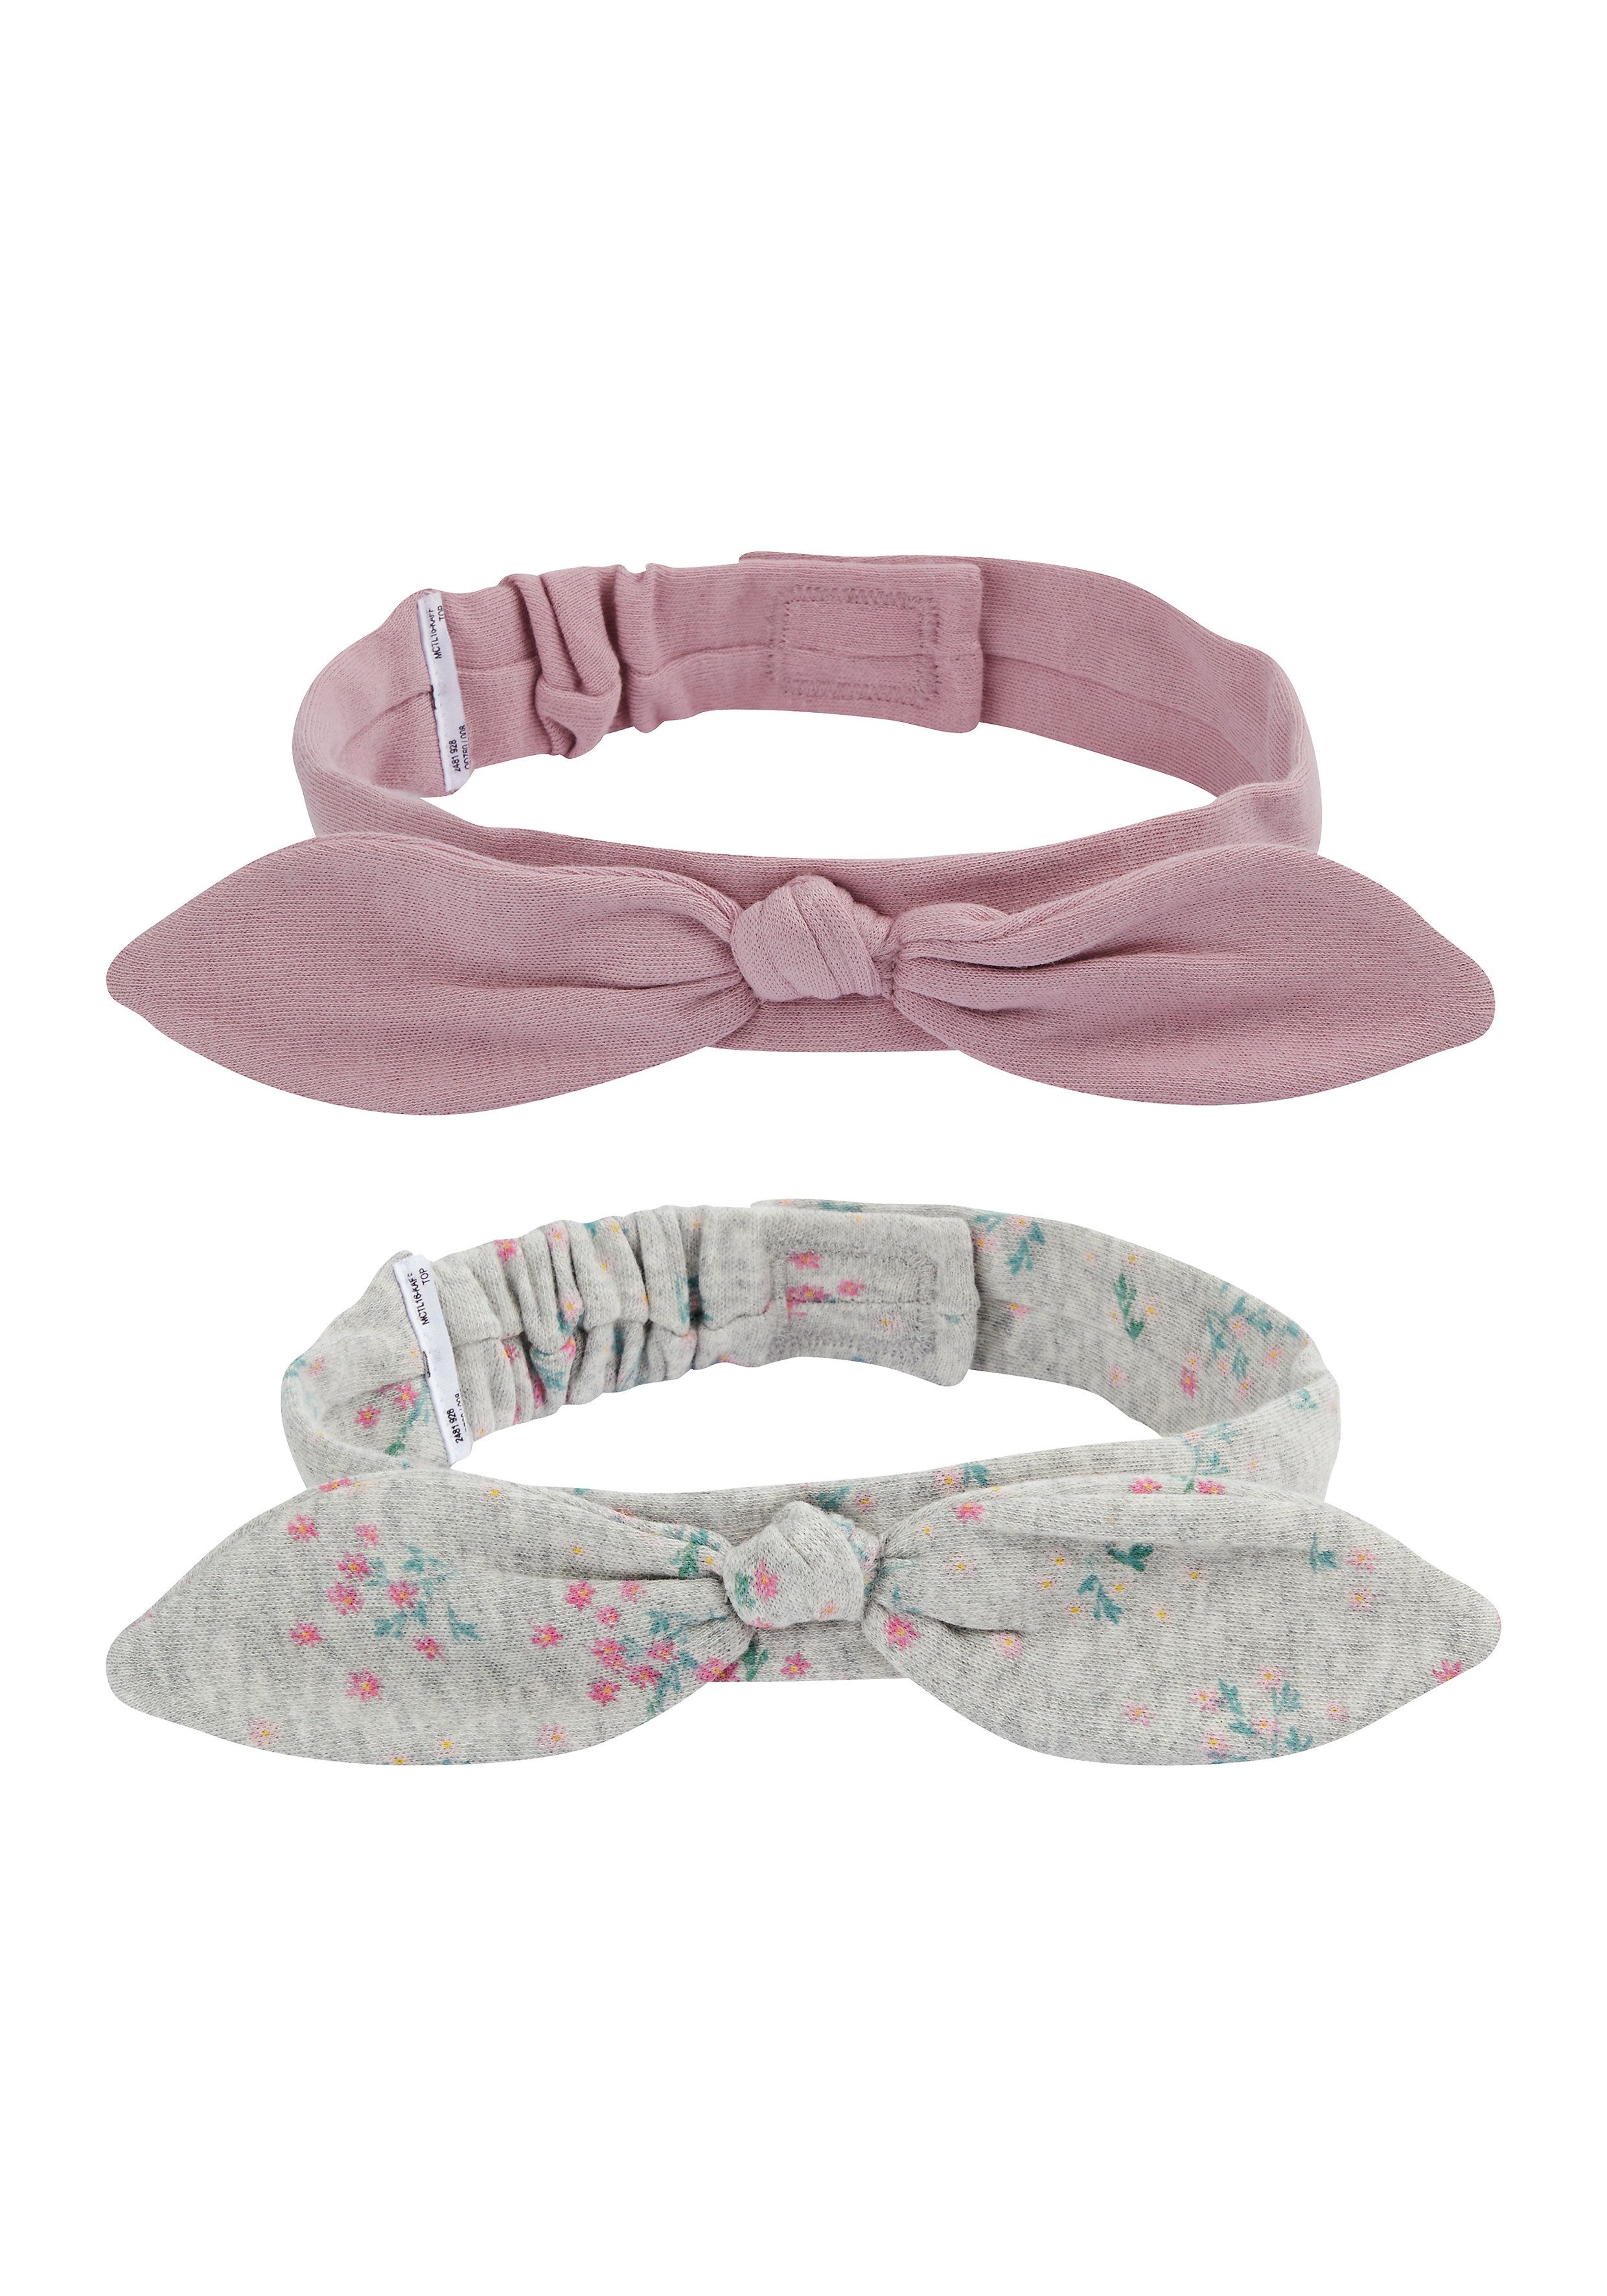 Mothercare | Girls Pink And Grey Floral Hairbands - 2 Pack - Pink